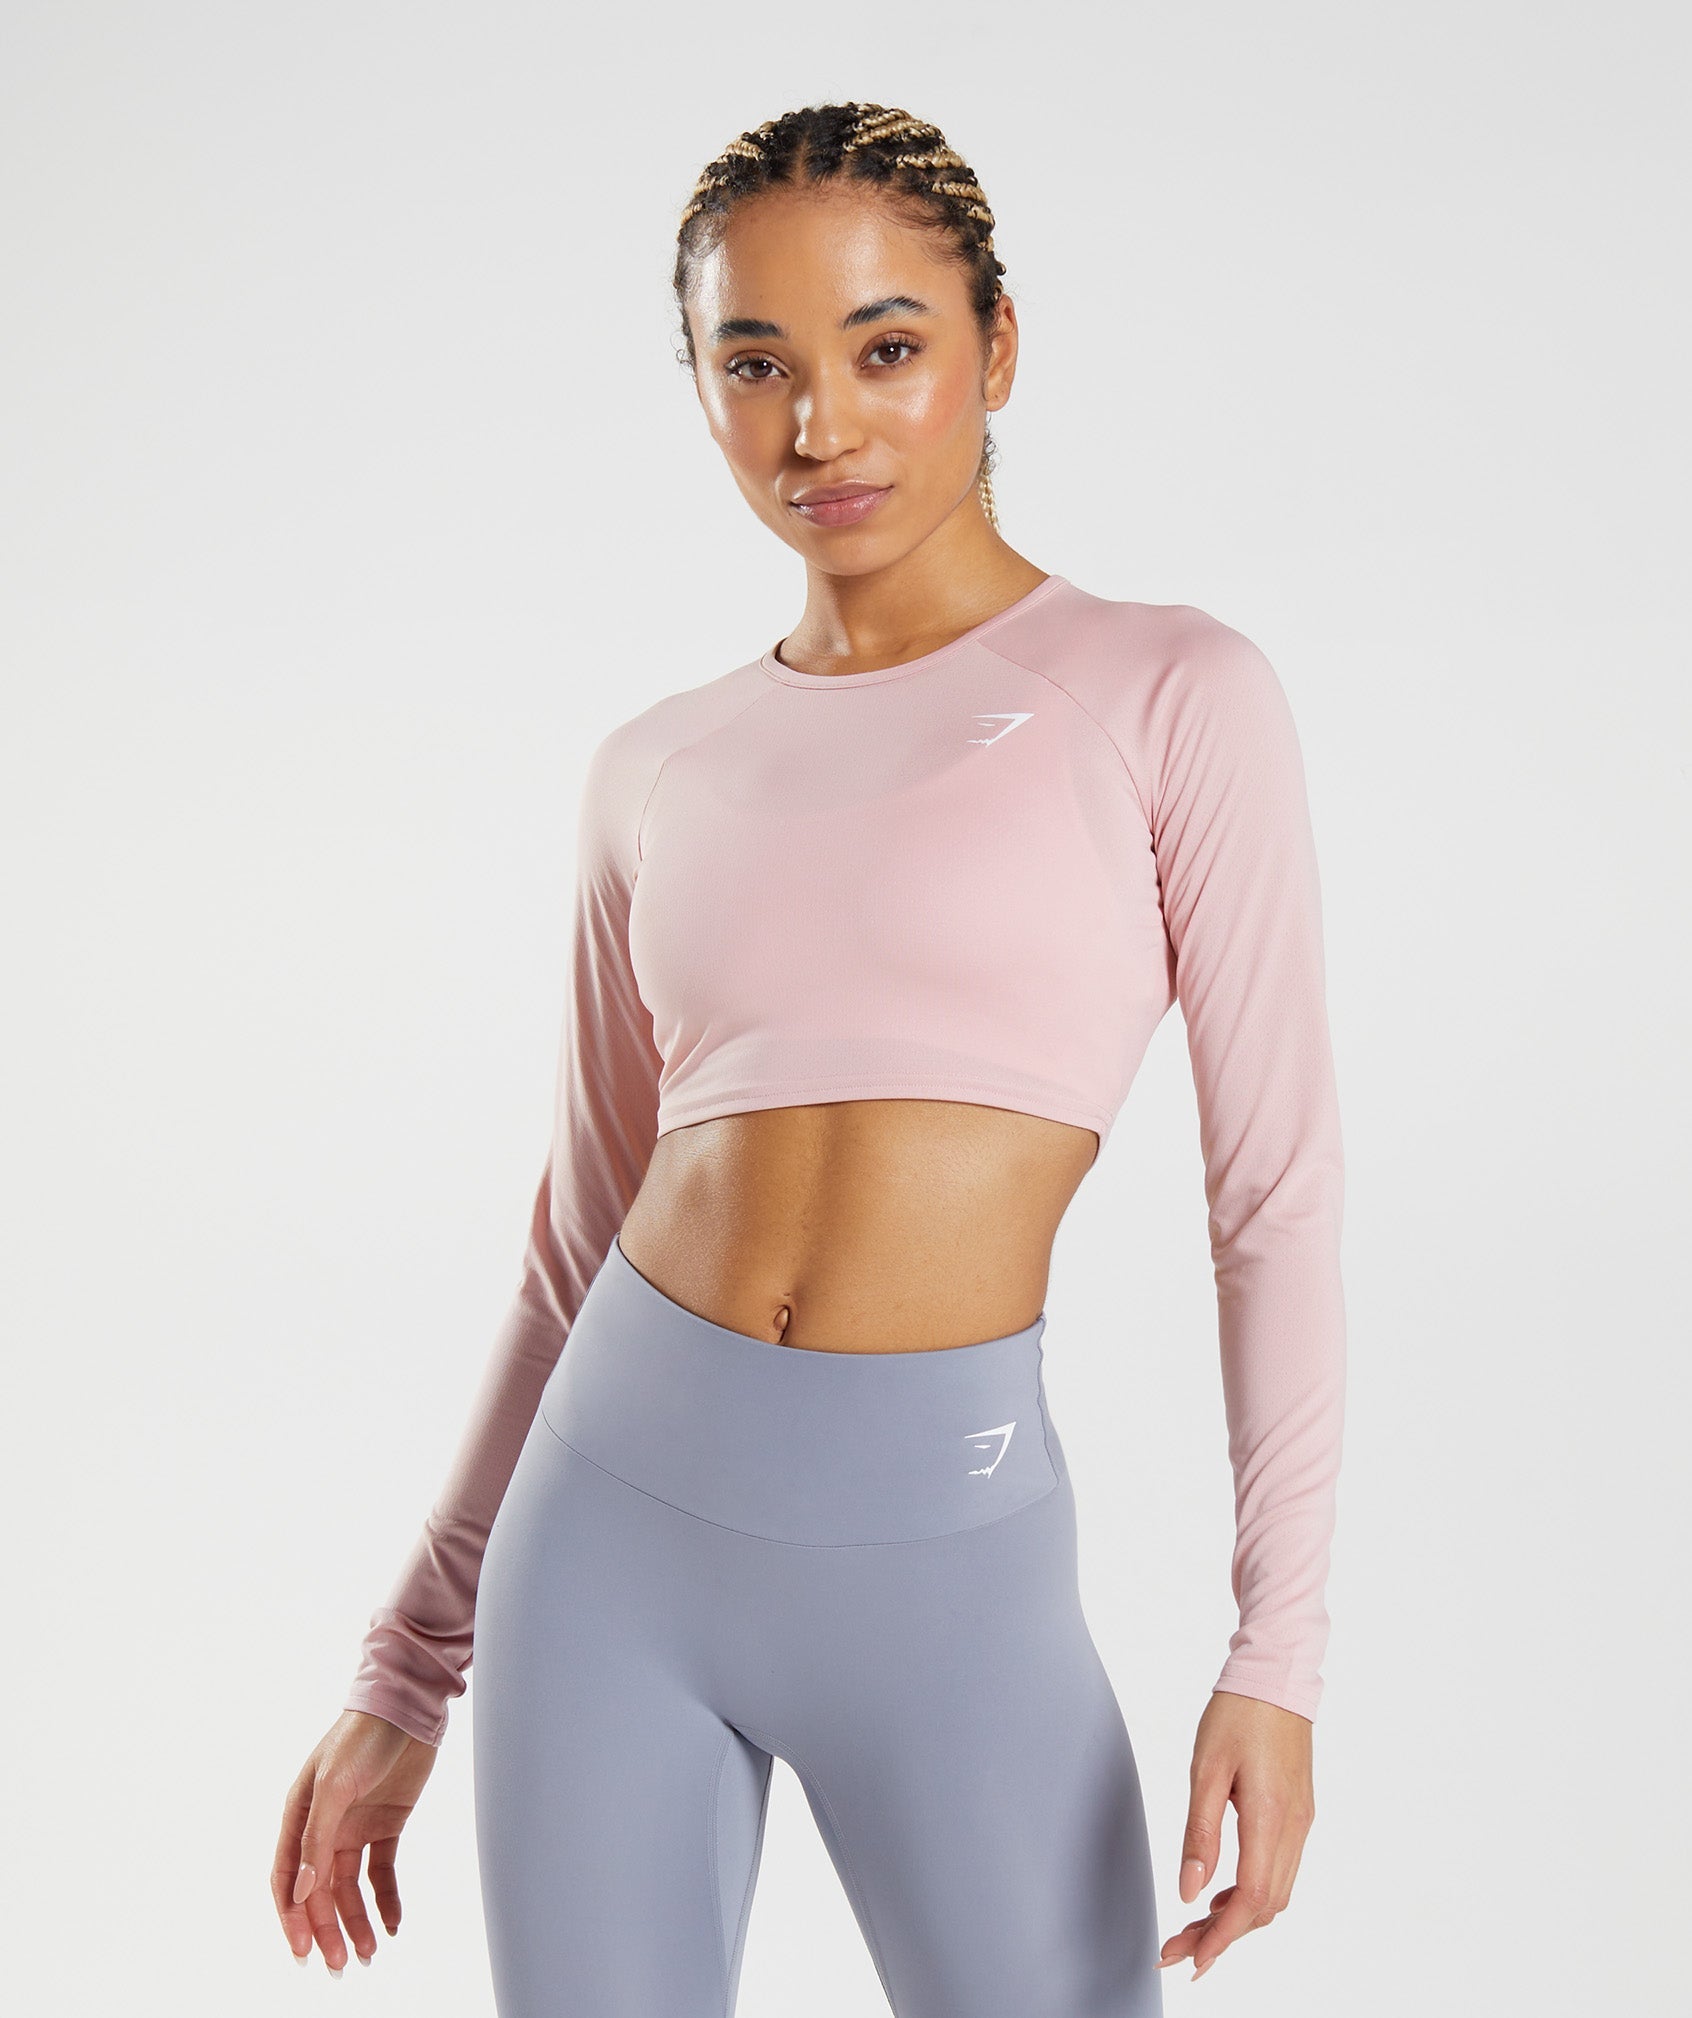 Gymshark Fraction Crop Top M Pebble Pink Size M - $28 - From Caitlin